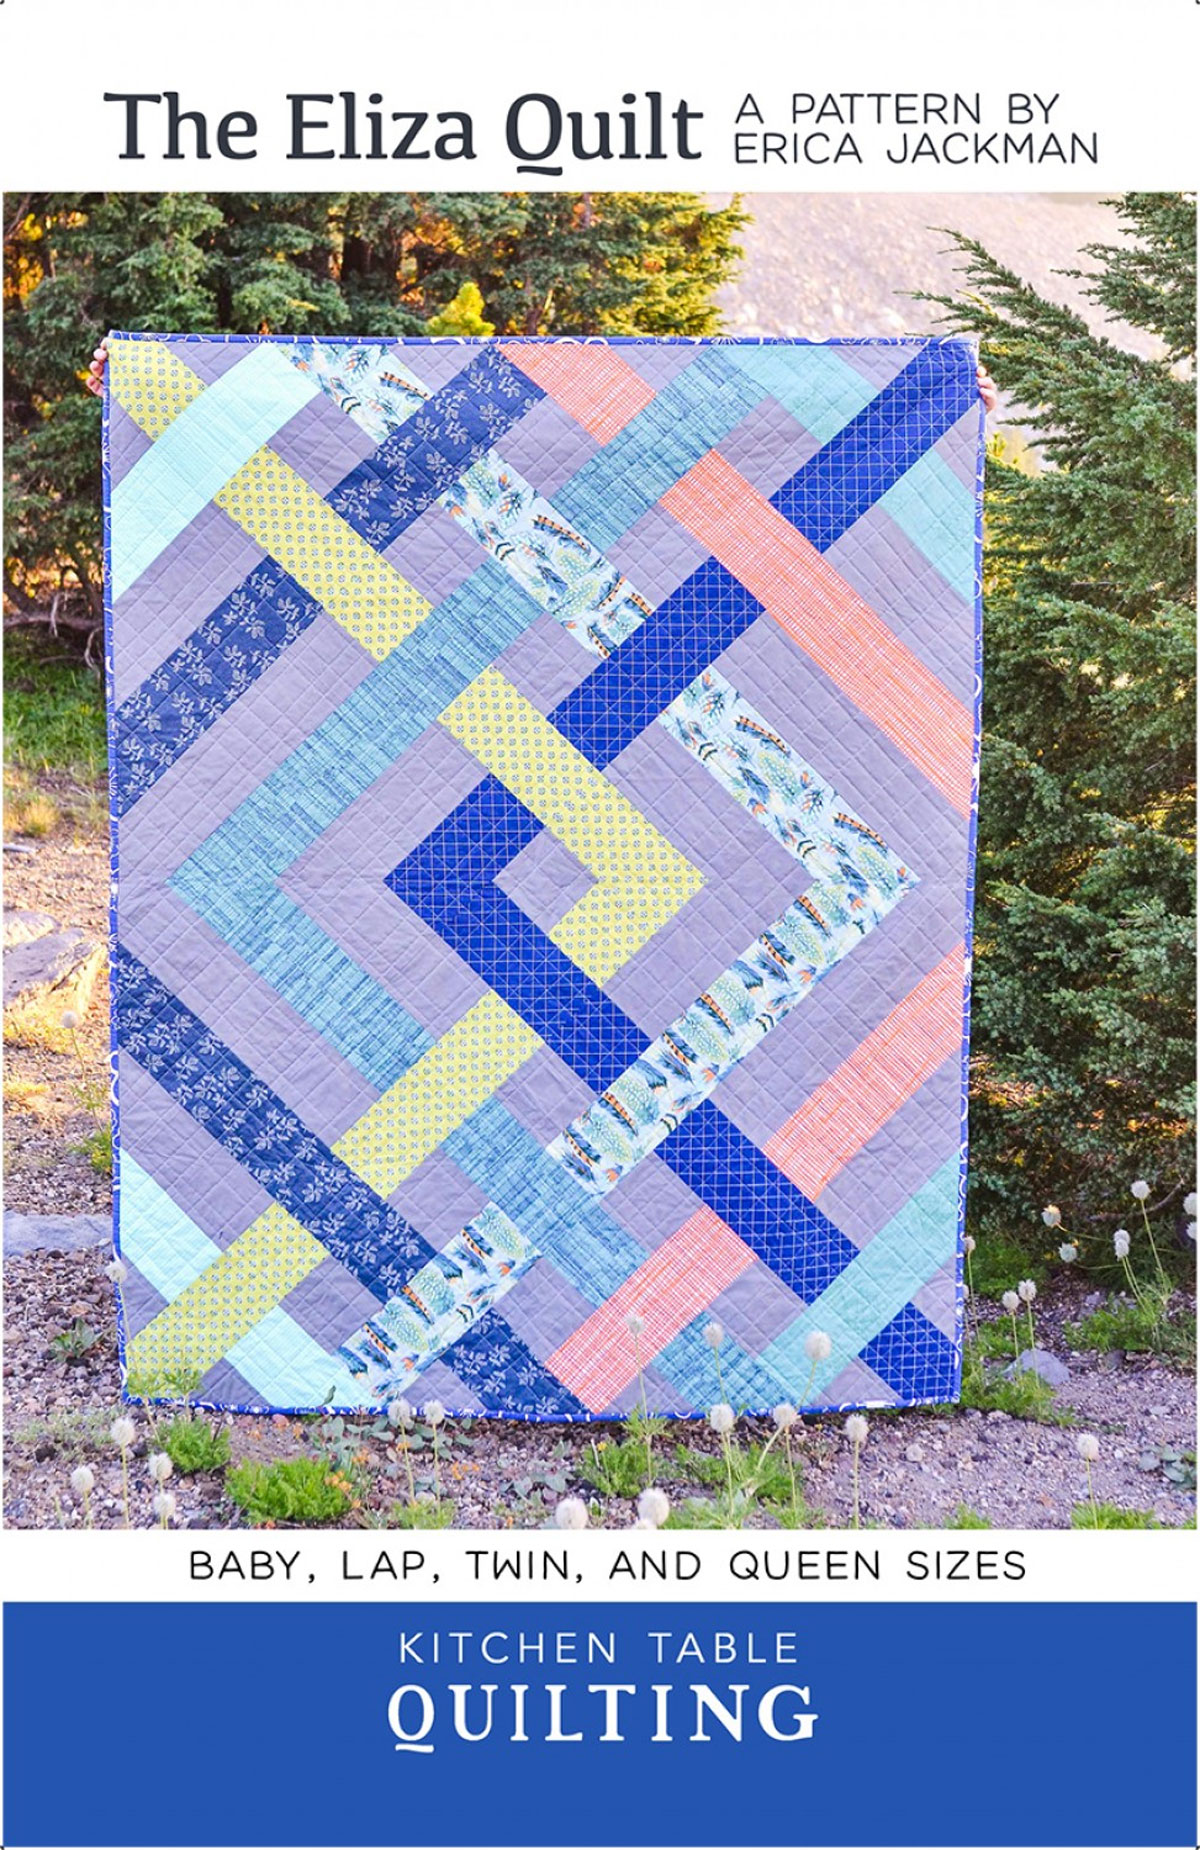 The-Eliza-quilt-sewing-pattern-Kitchen-Table-Quilting-Erica-Jackman-front